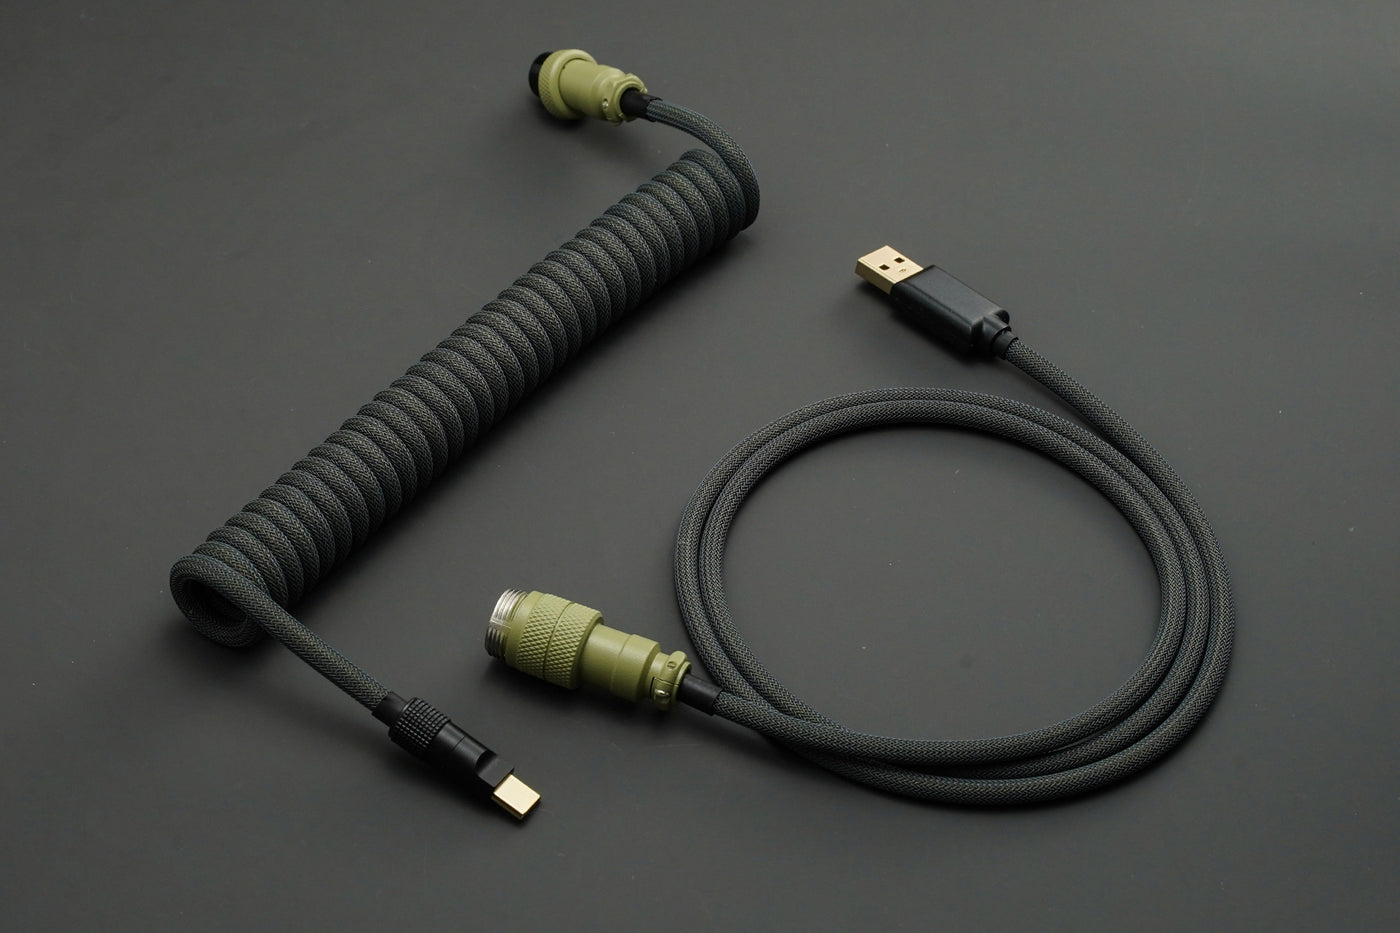 FBB Custom Coiled USB Cable With Aviator Connector 2